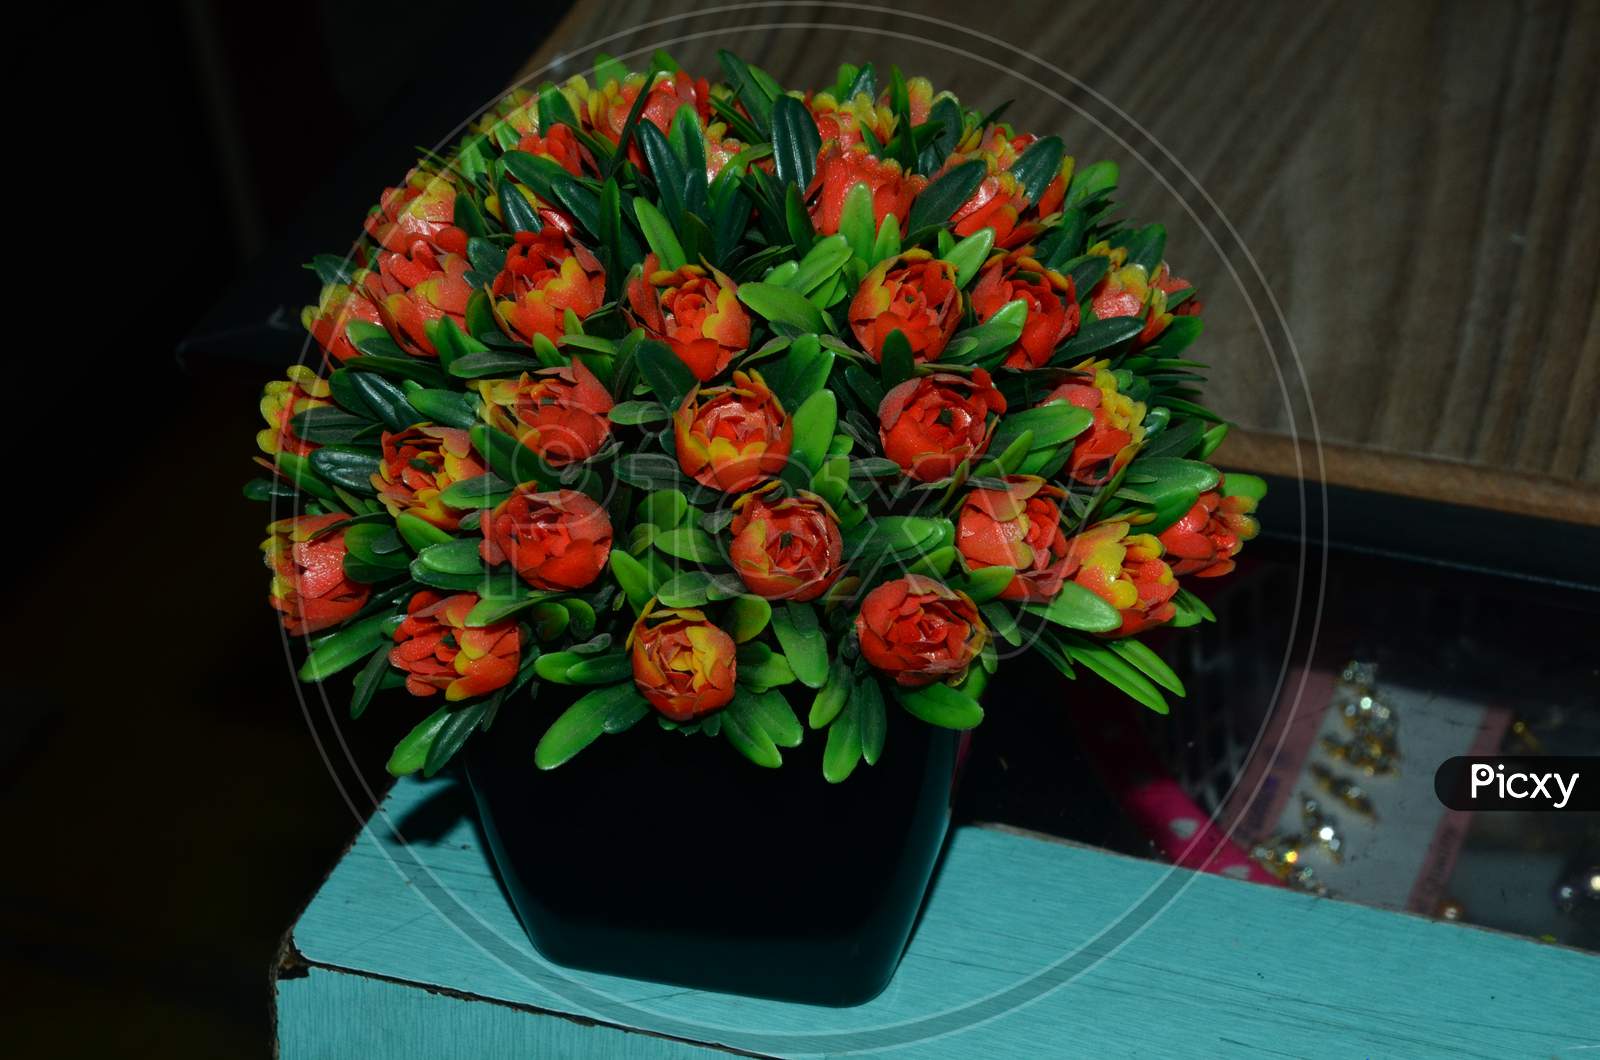 Flower Vase With Artificial Flowers On a Table